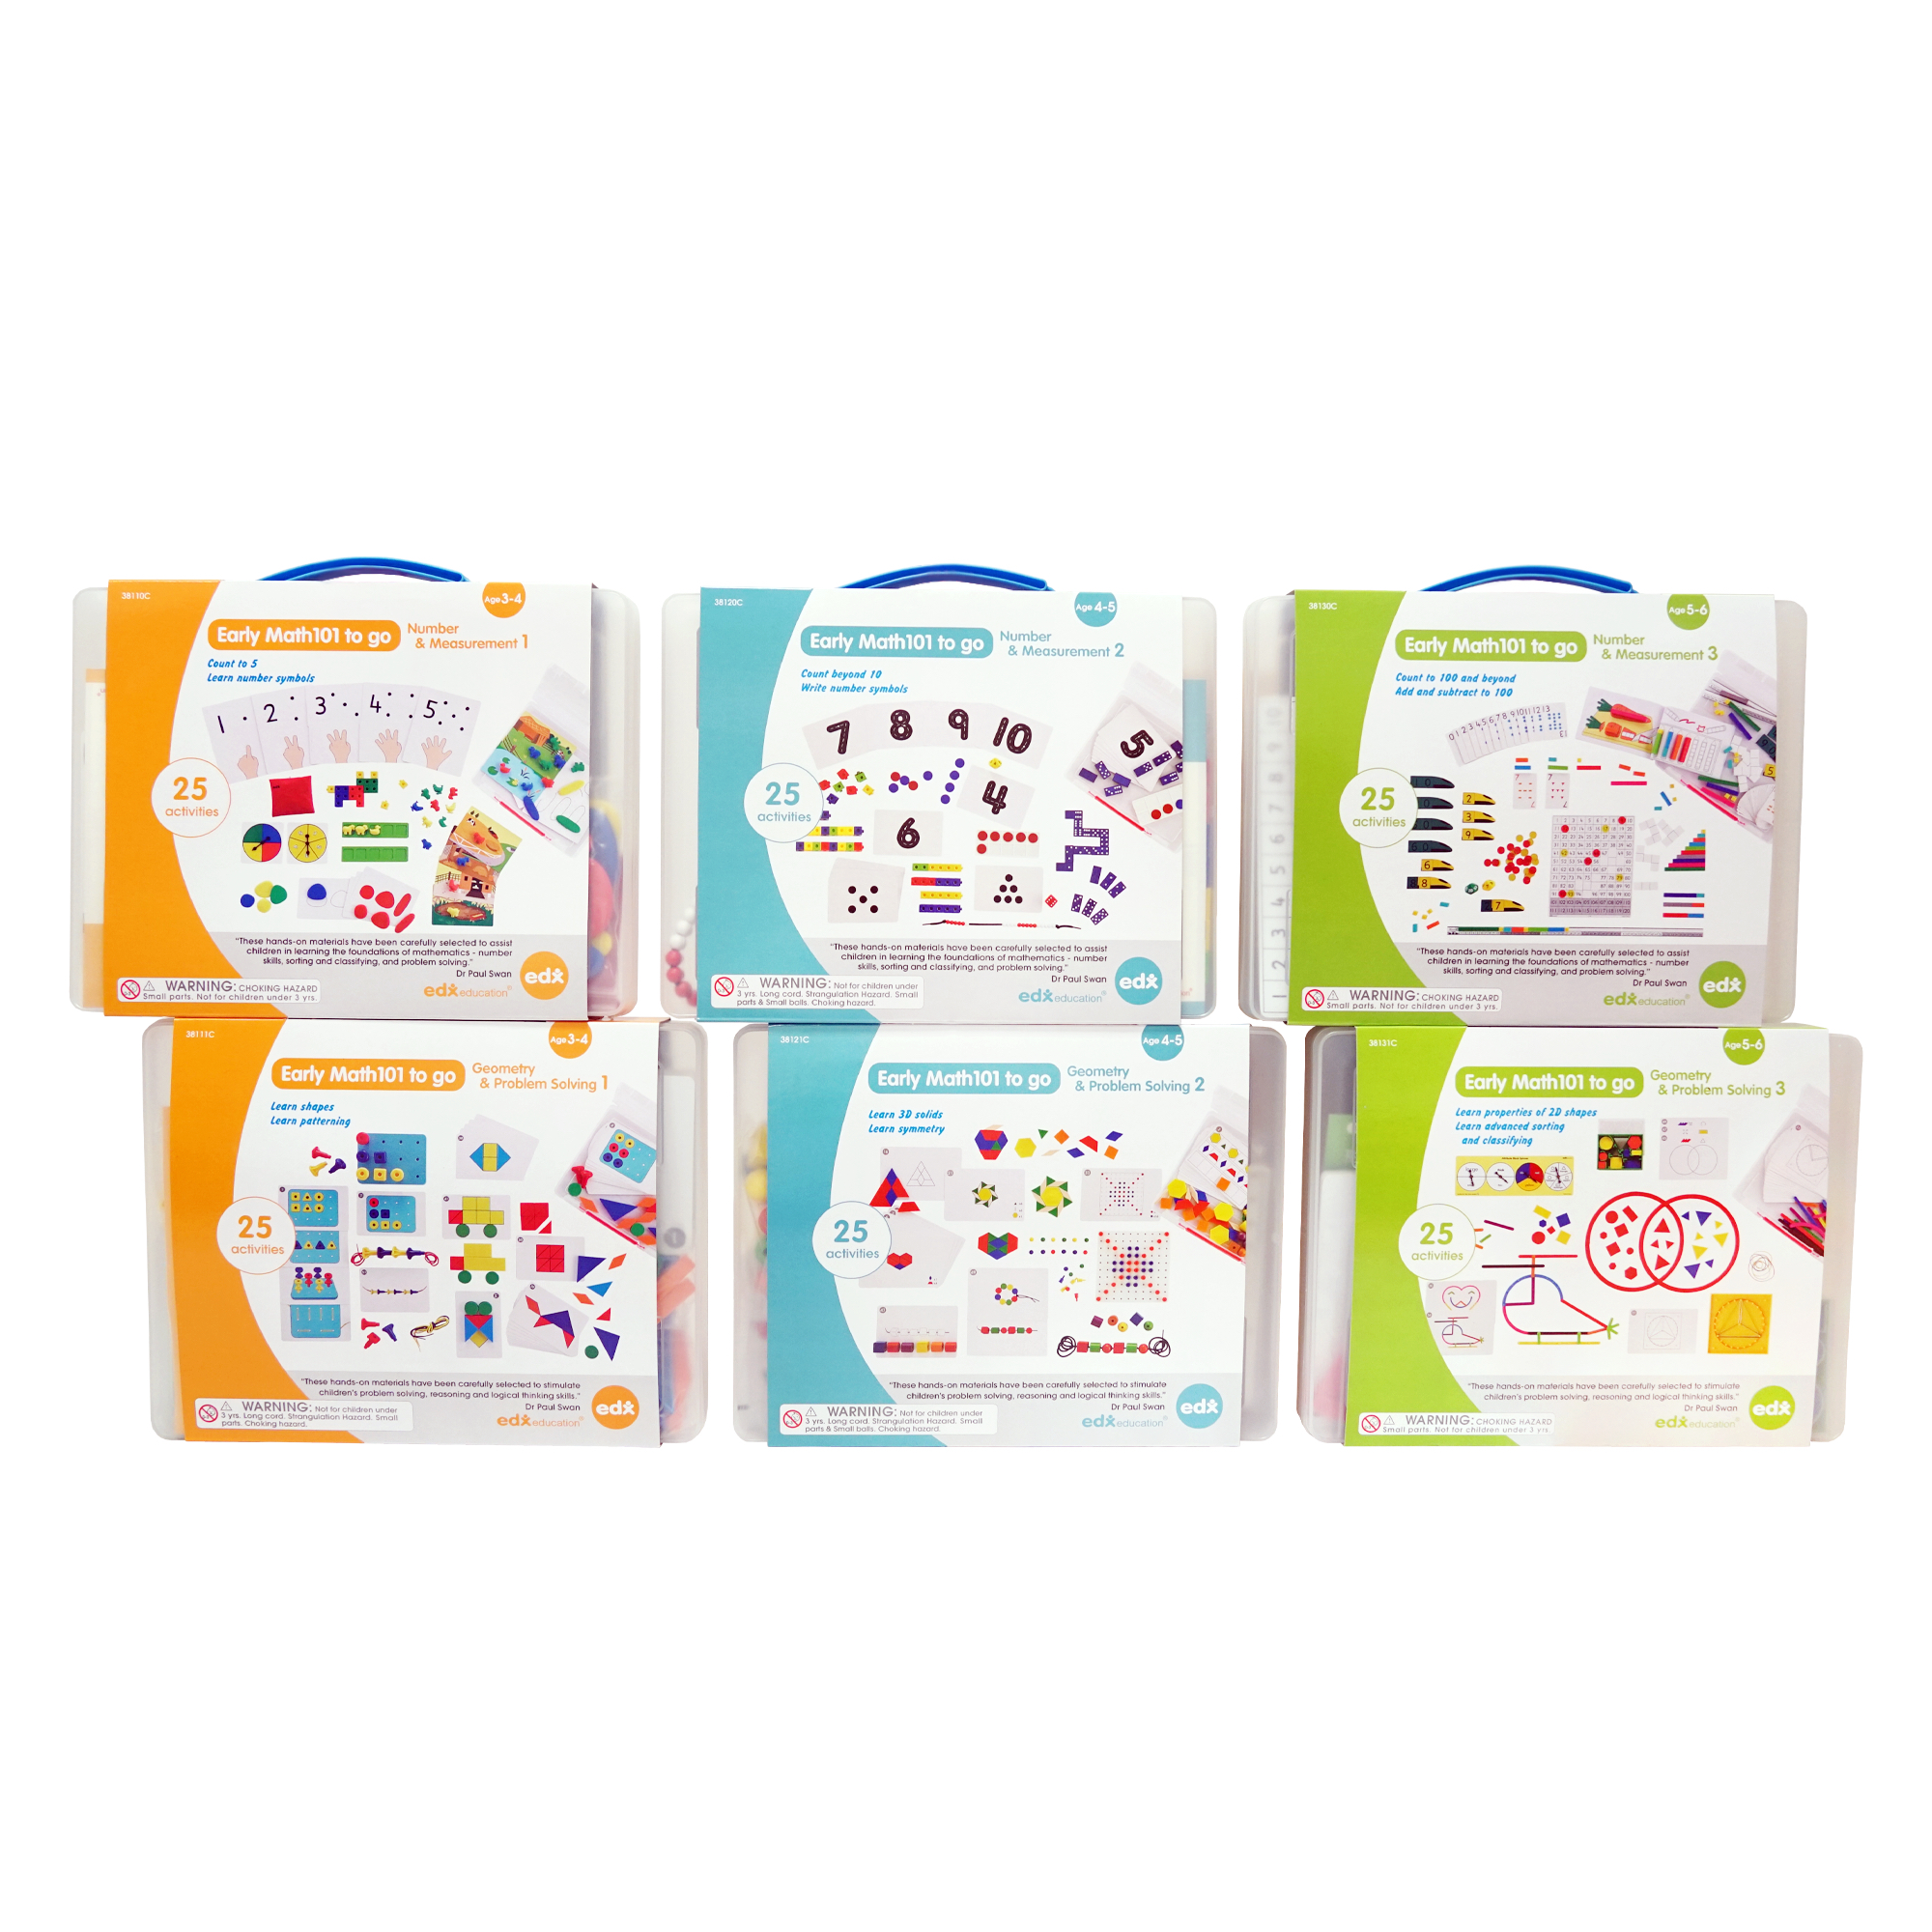 Back To School Giveaways – Win an EDX Education Early Math101 Set worth £35